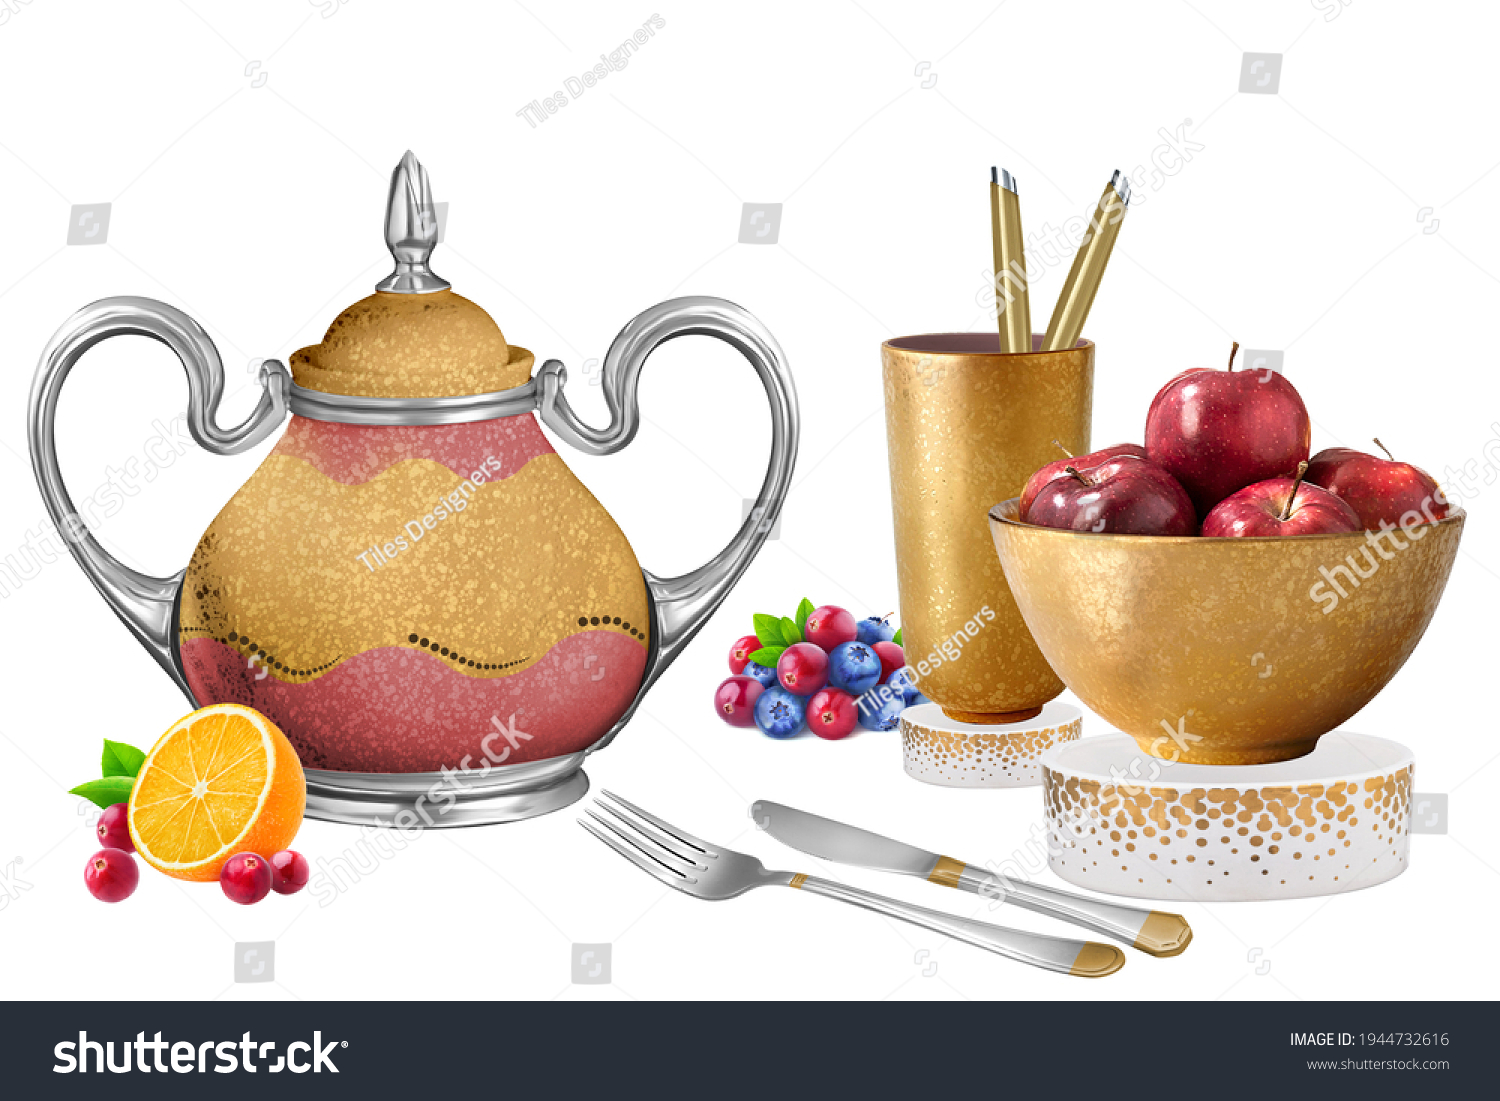 Gold and pink kitchen glass and cup set with fruits apples lemon grapes spoon kitchen set #1944732616